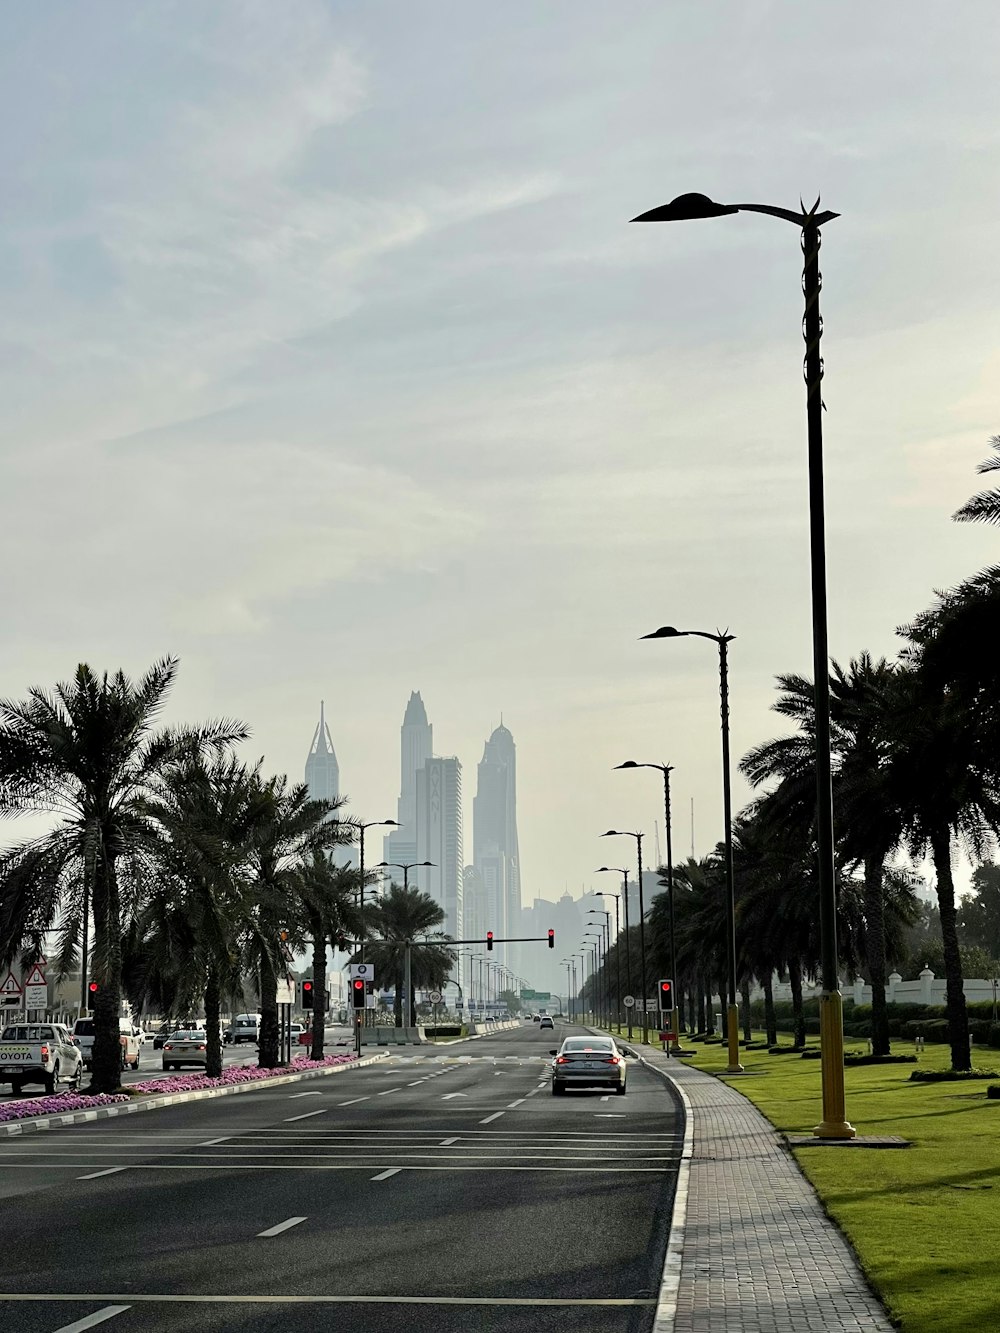 a city street with palm trees and tall buildings